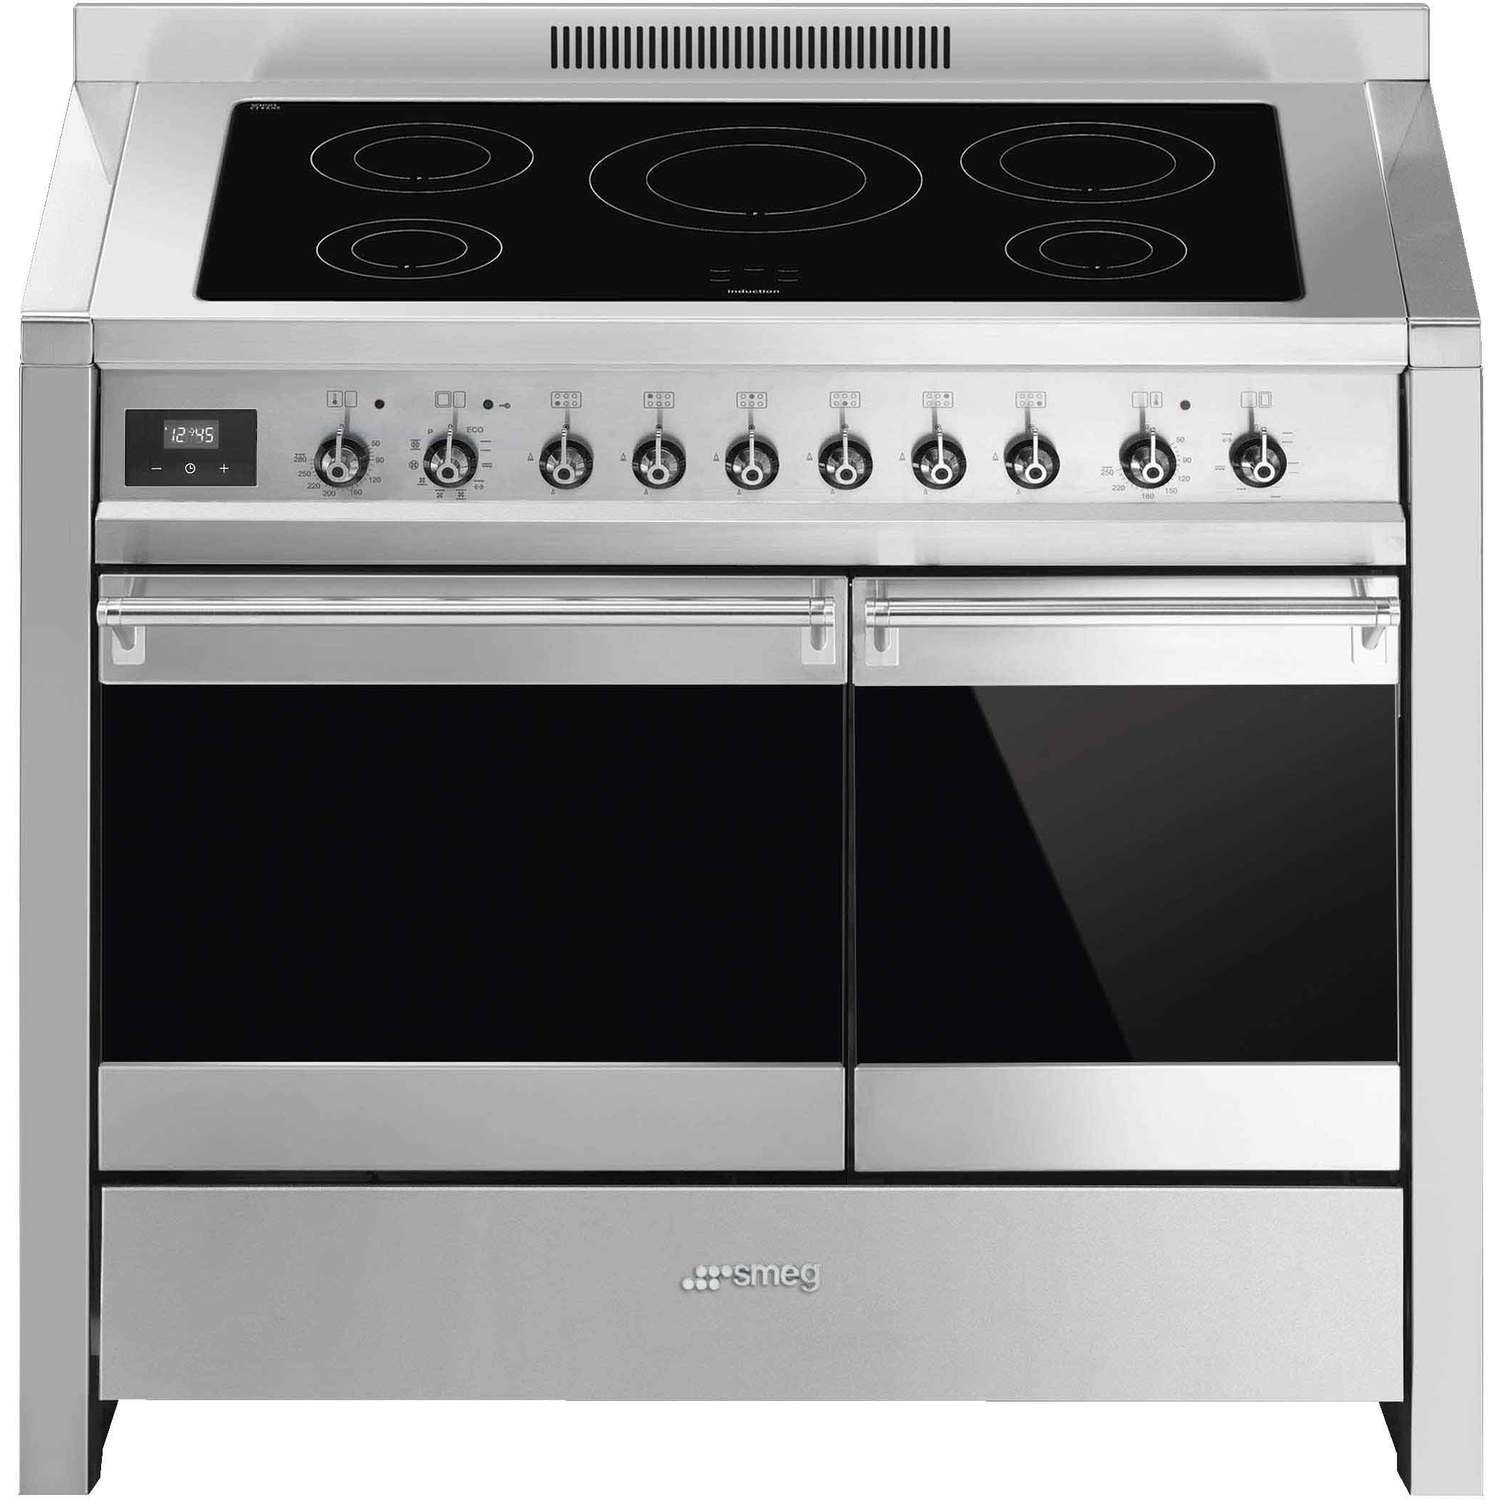 Refurbished Smeg Opera A2PYID-81 100cm Electric Range Cooker with Induction Hob Stainless Steel